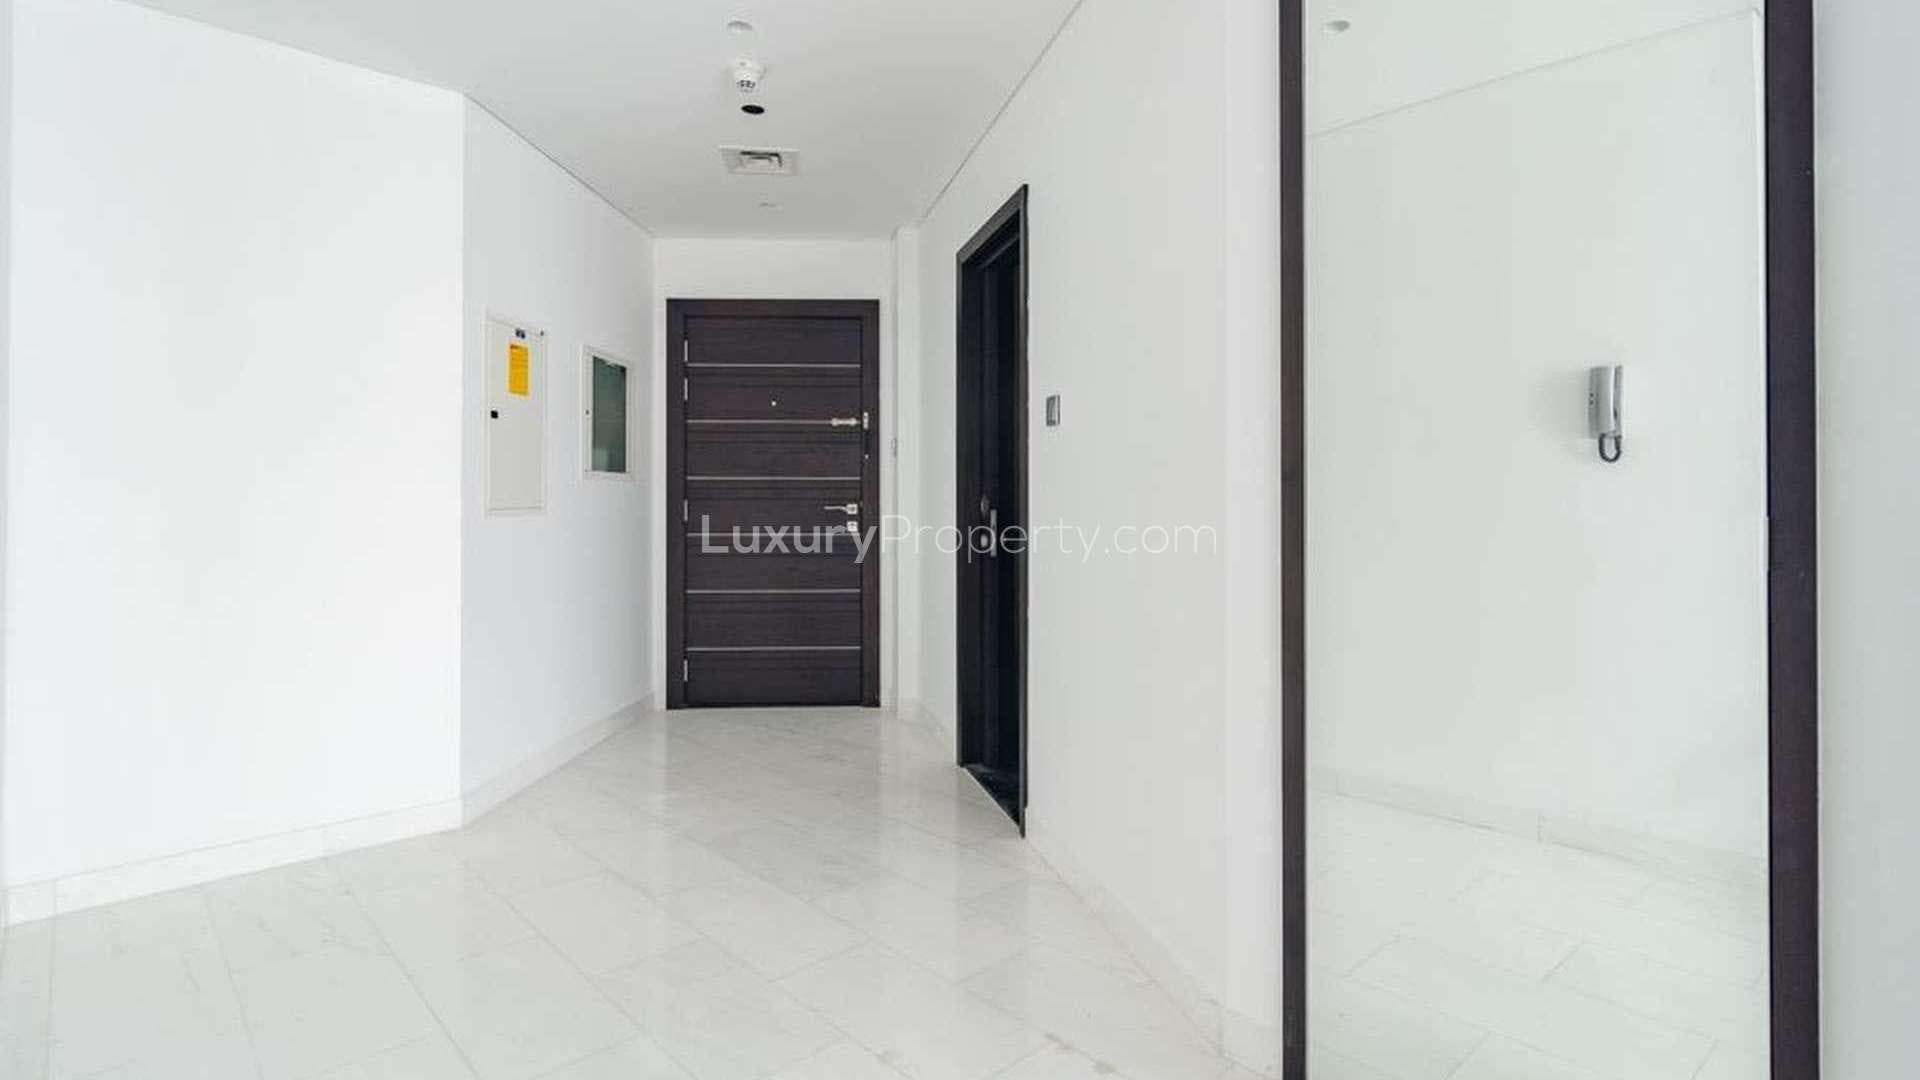 2 Bedroom Apartment For Rent Cayan Tower Lp32719 256b26706f387400.jpg